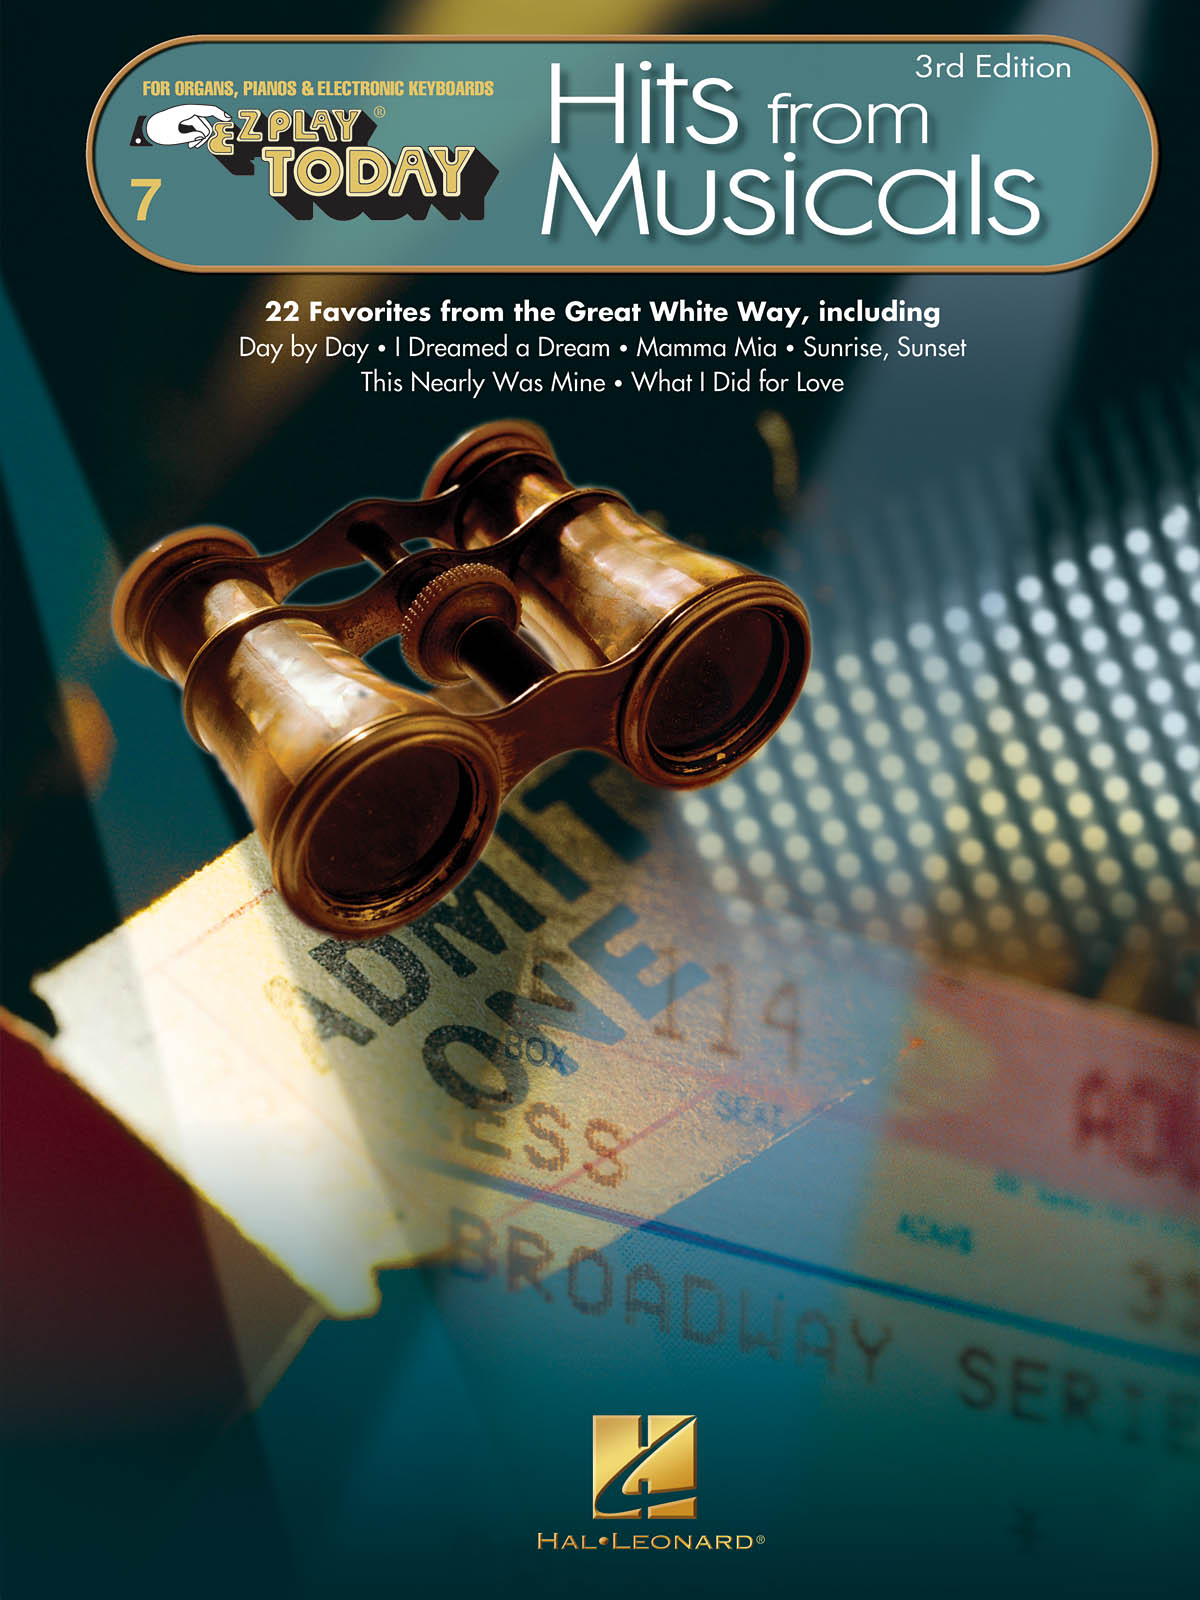 Hits from Musicals 3rd Ed.  - E-Z Play Today Volume 7